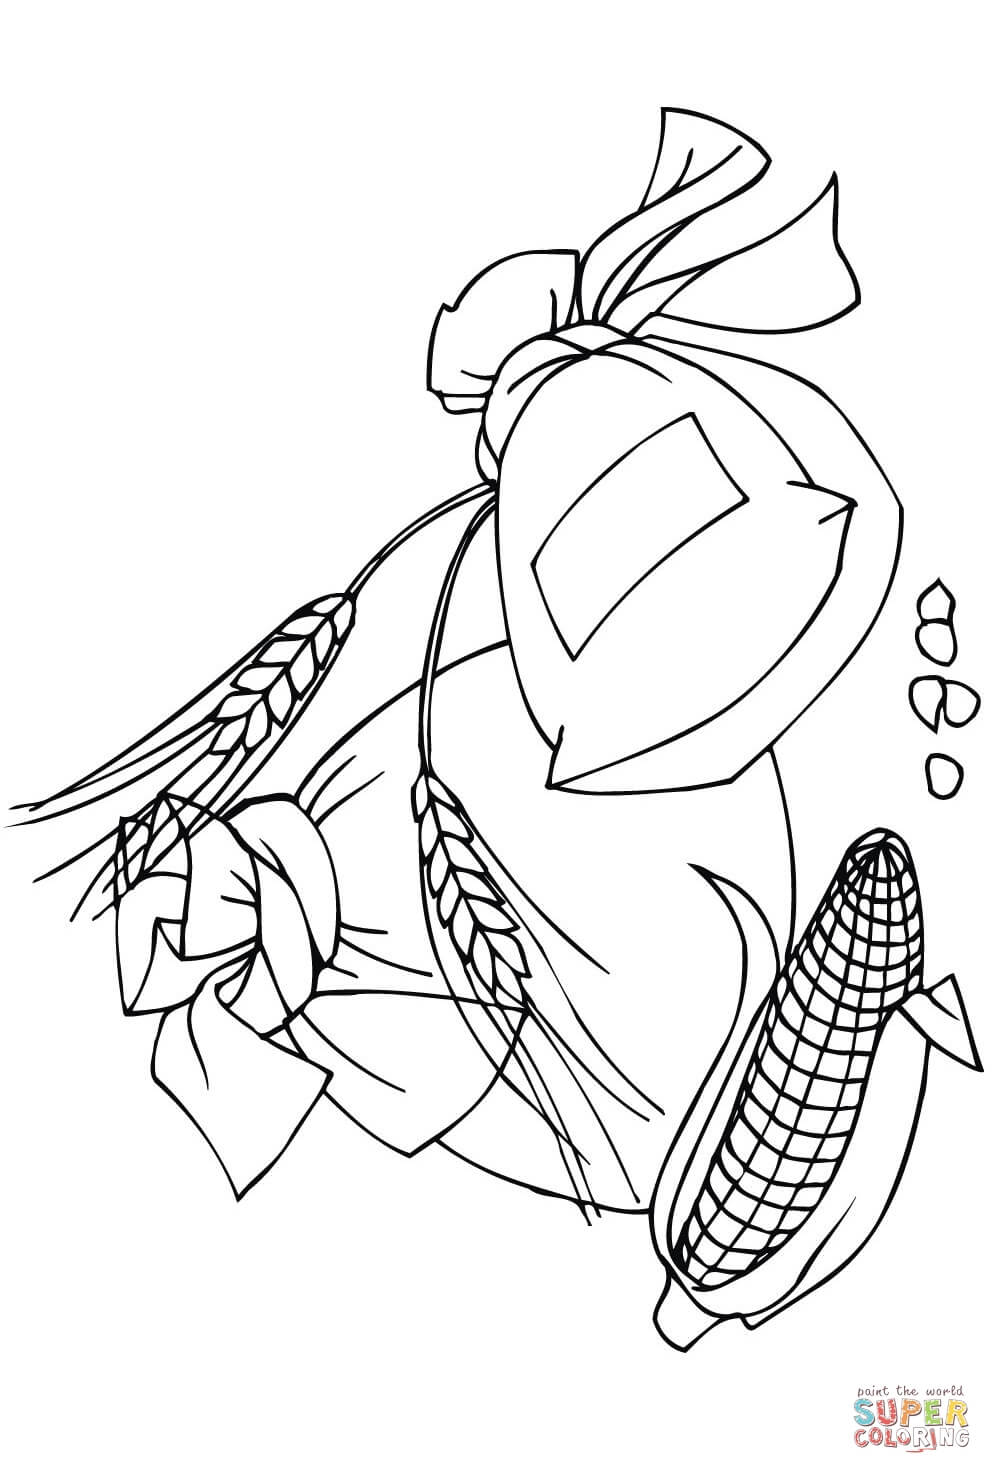 Disney Color And Play Coloring Pages at GetColorings.com | Free